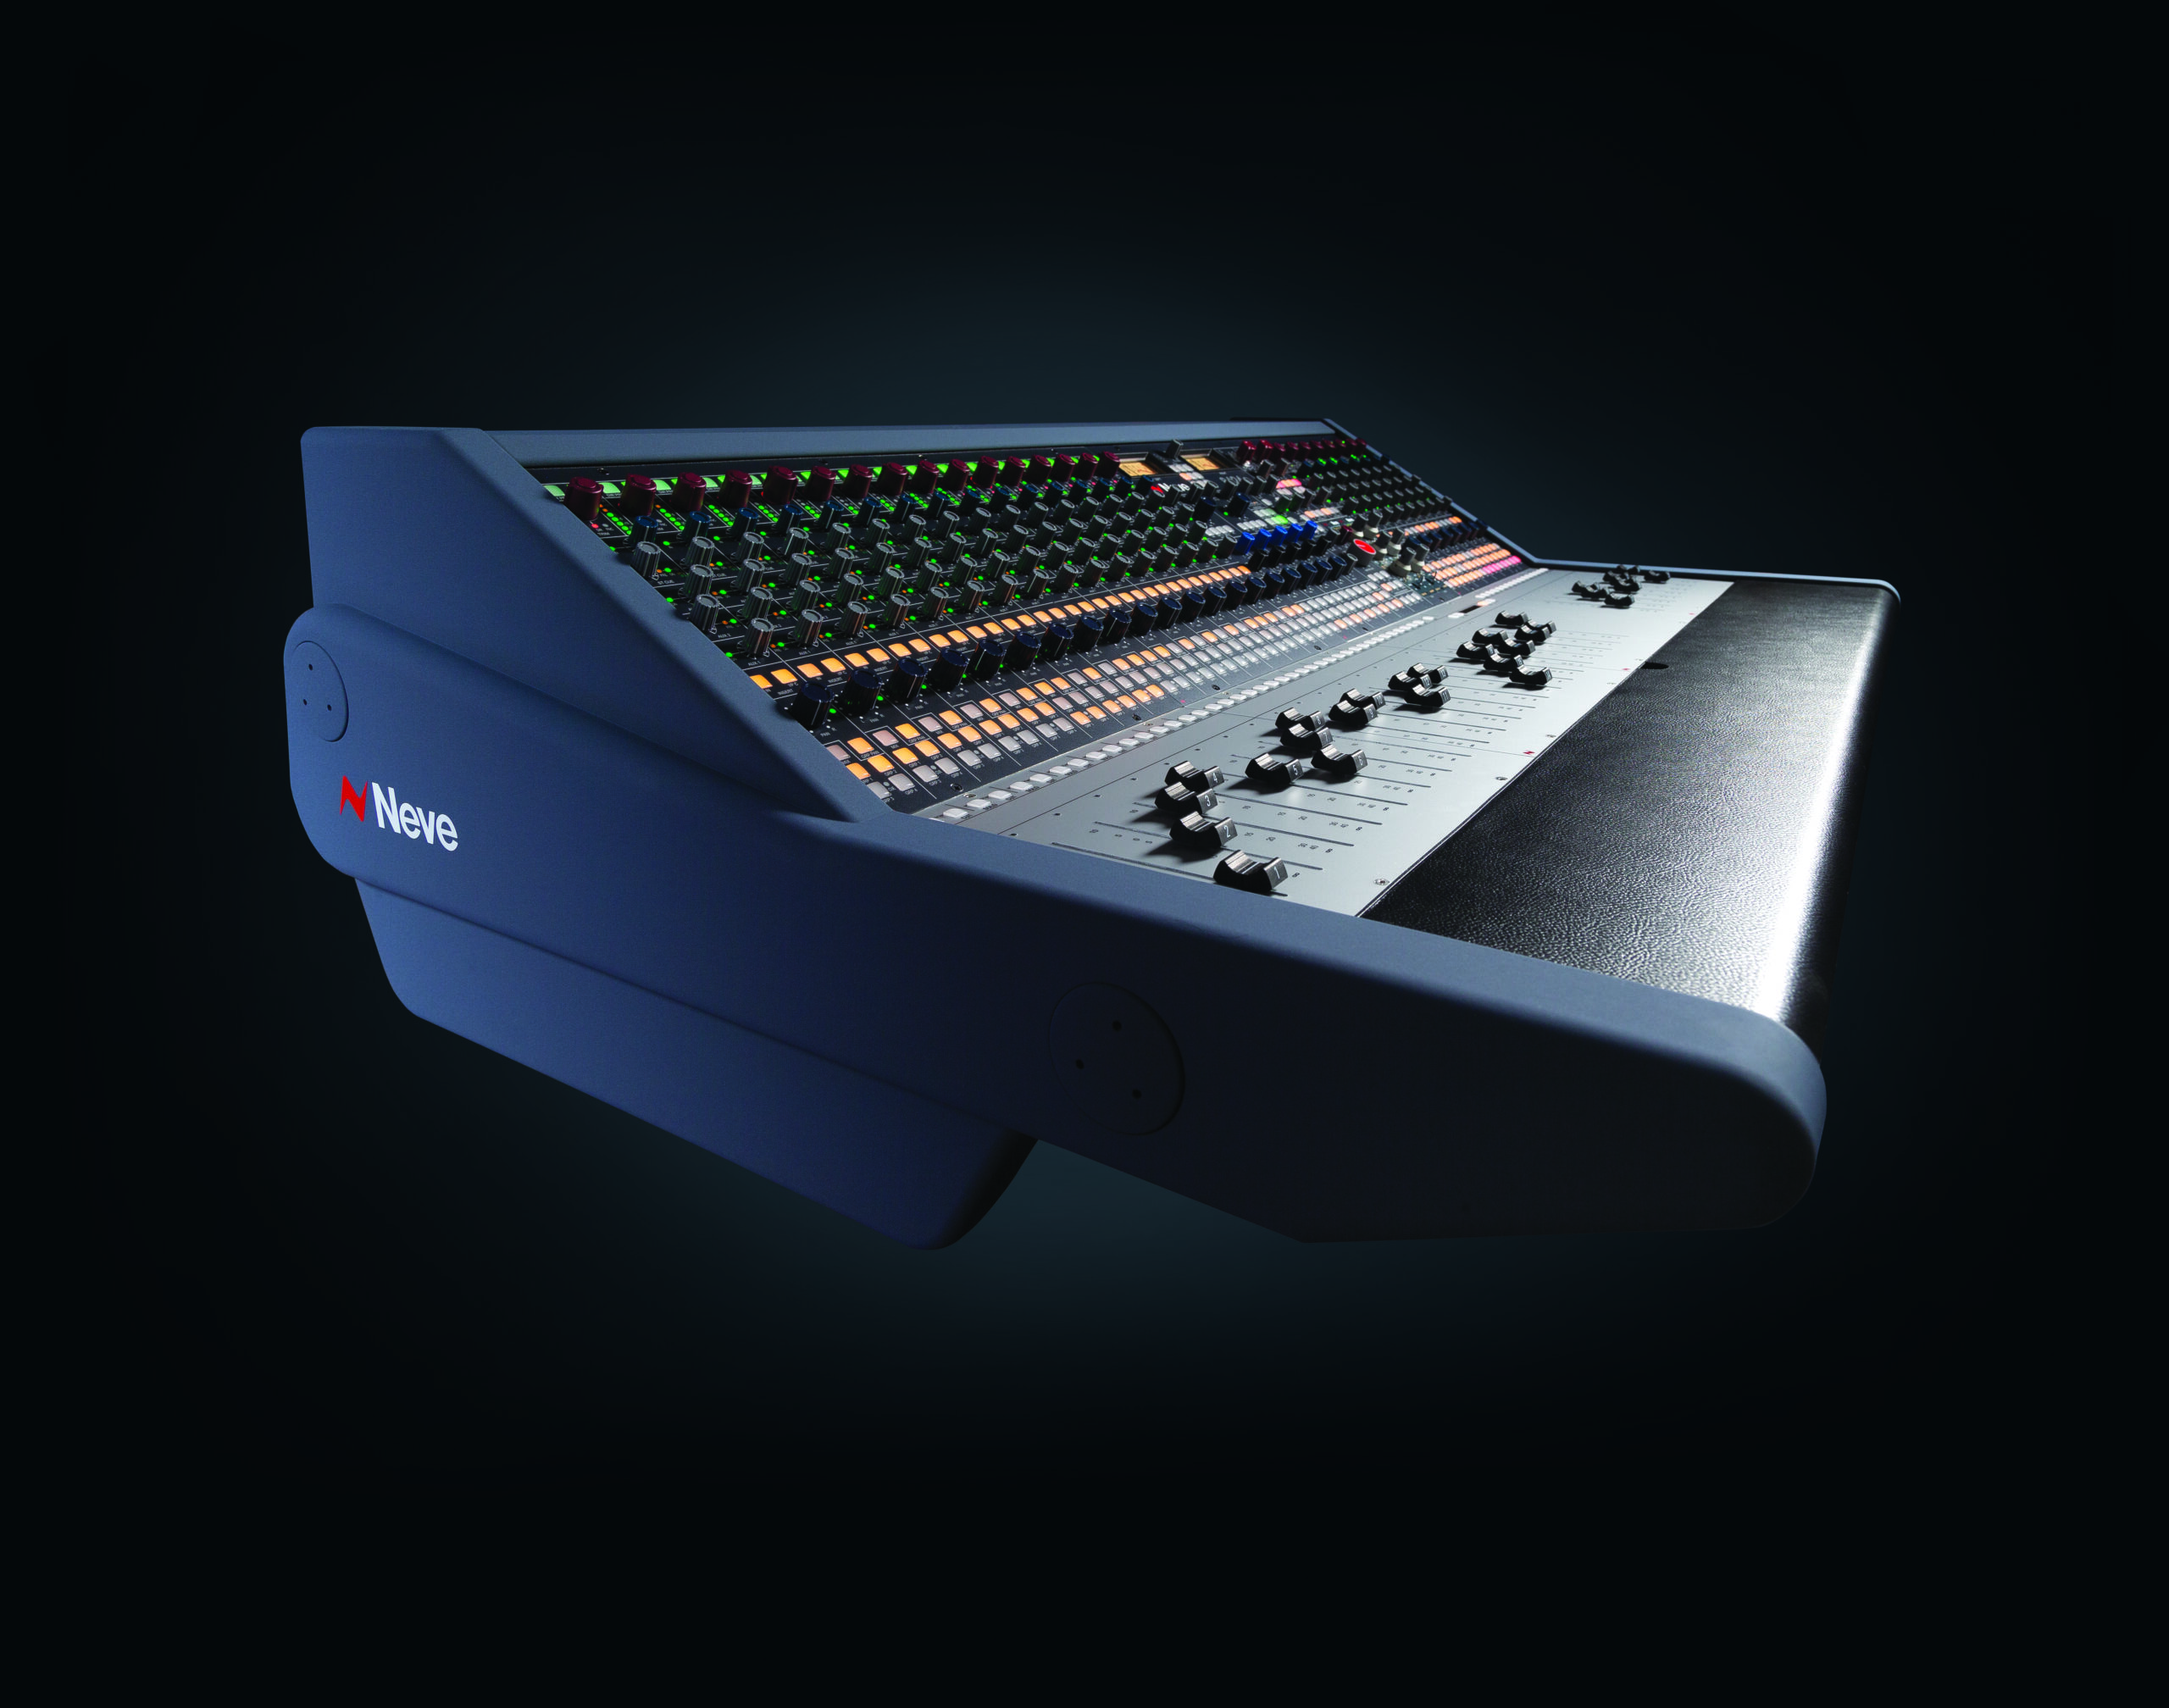 Introducing the Neve® 8424 Console – A Modern Console Designed for today’s Connected Workflows